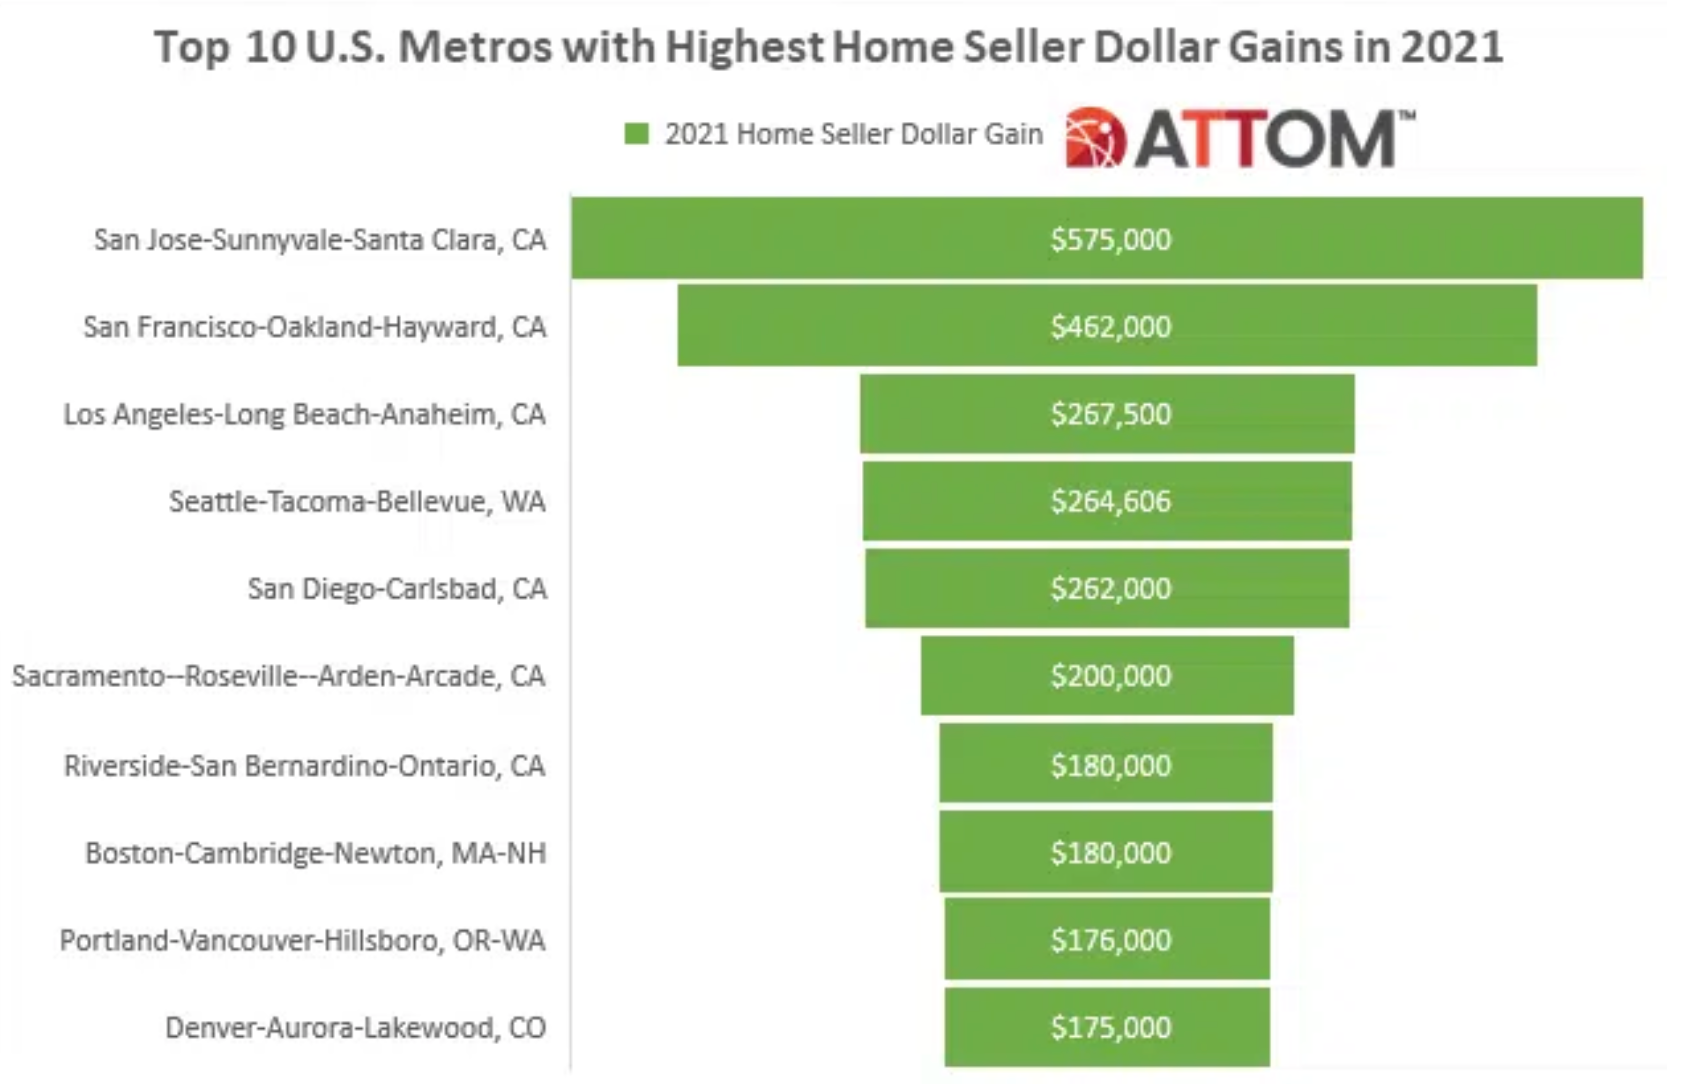 A list showing the top 10 U.S. metros with the highest home seller dollar gains in 2021.